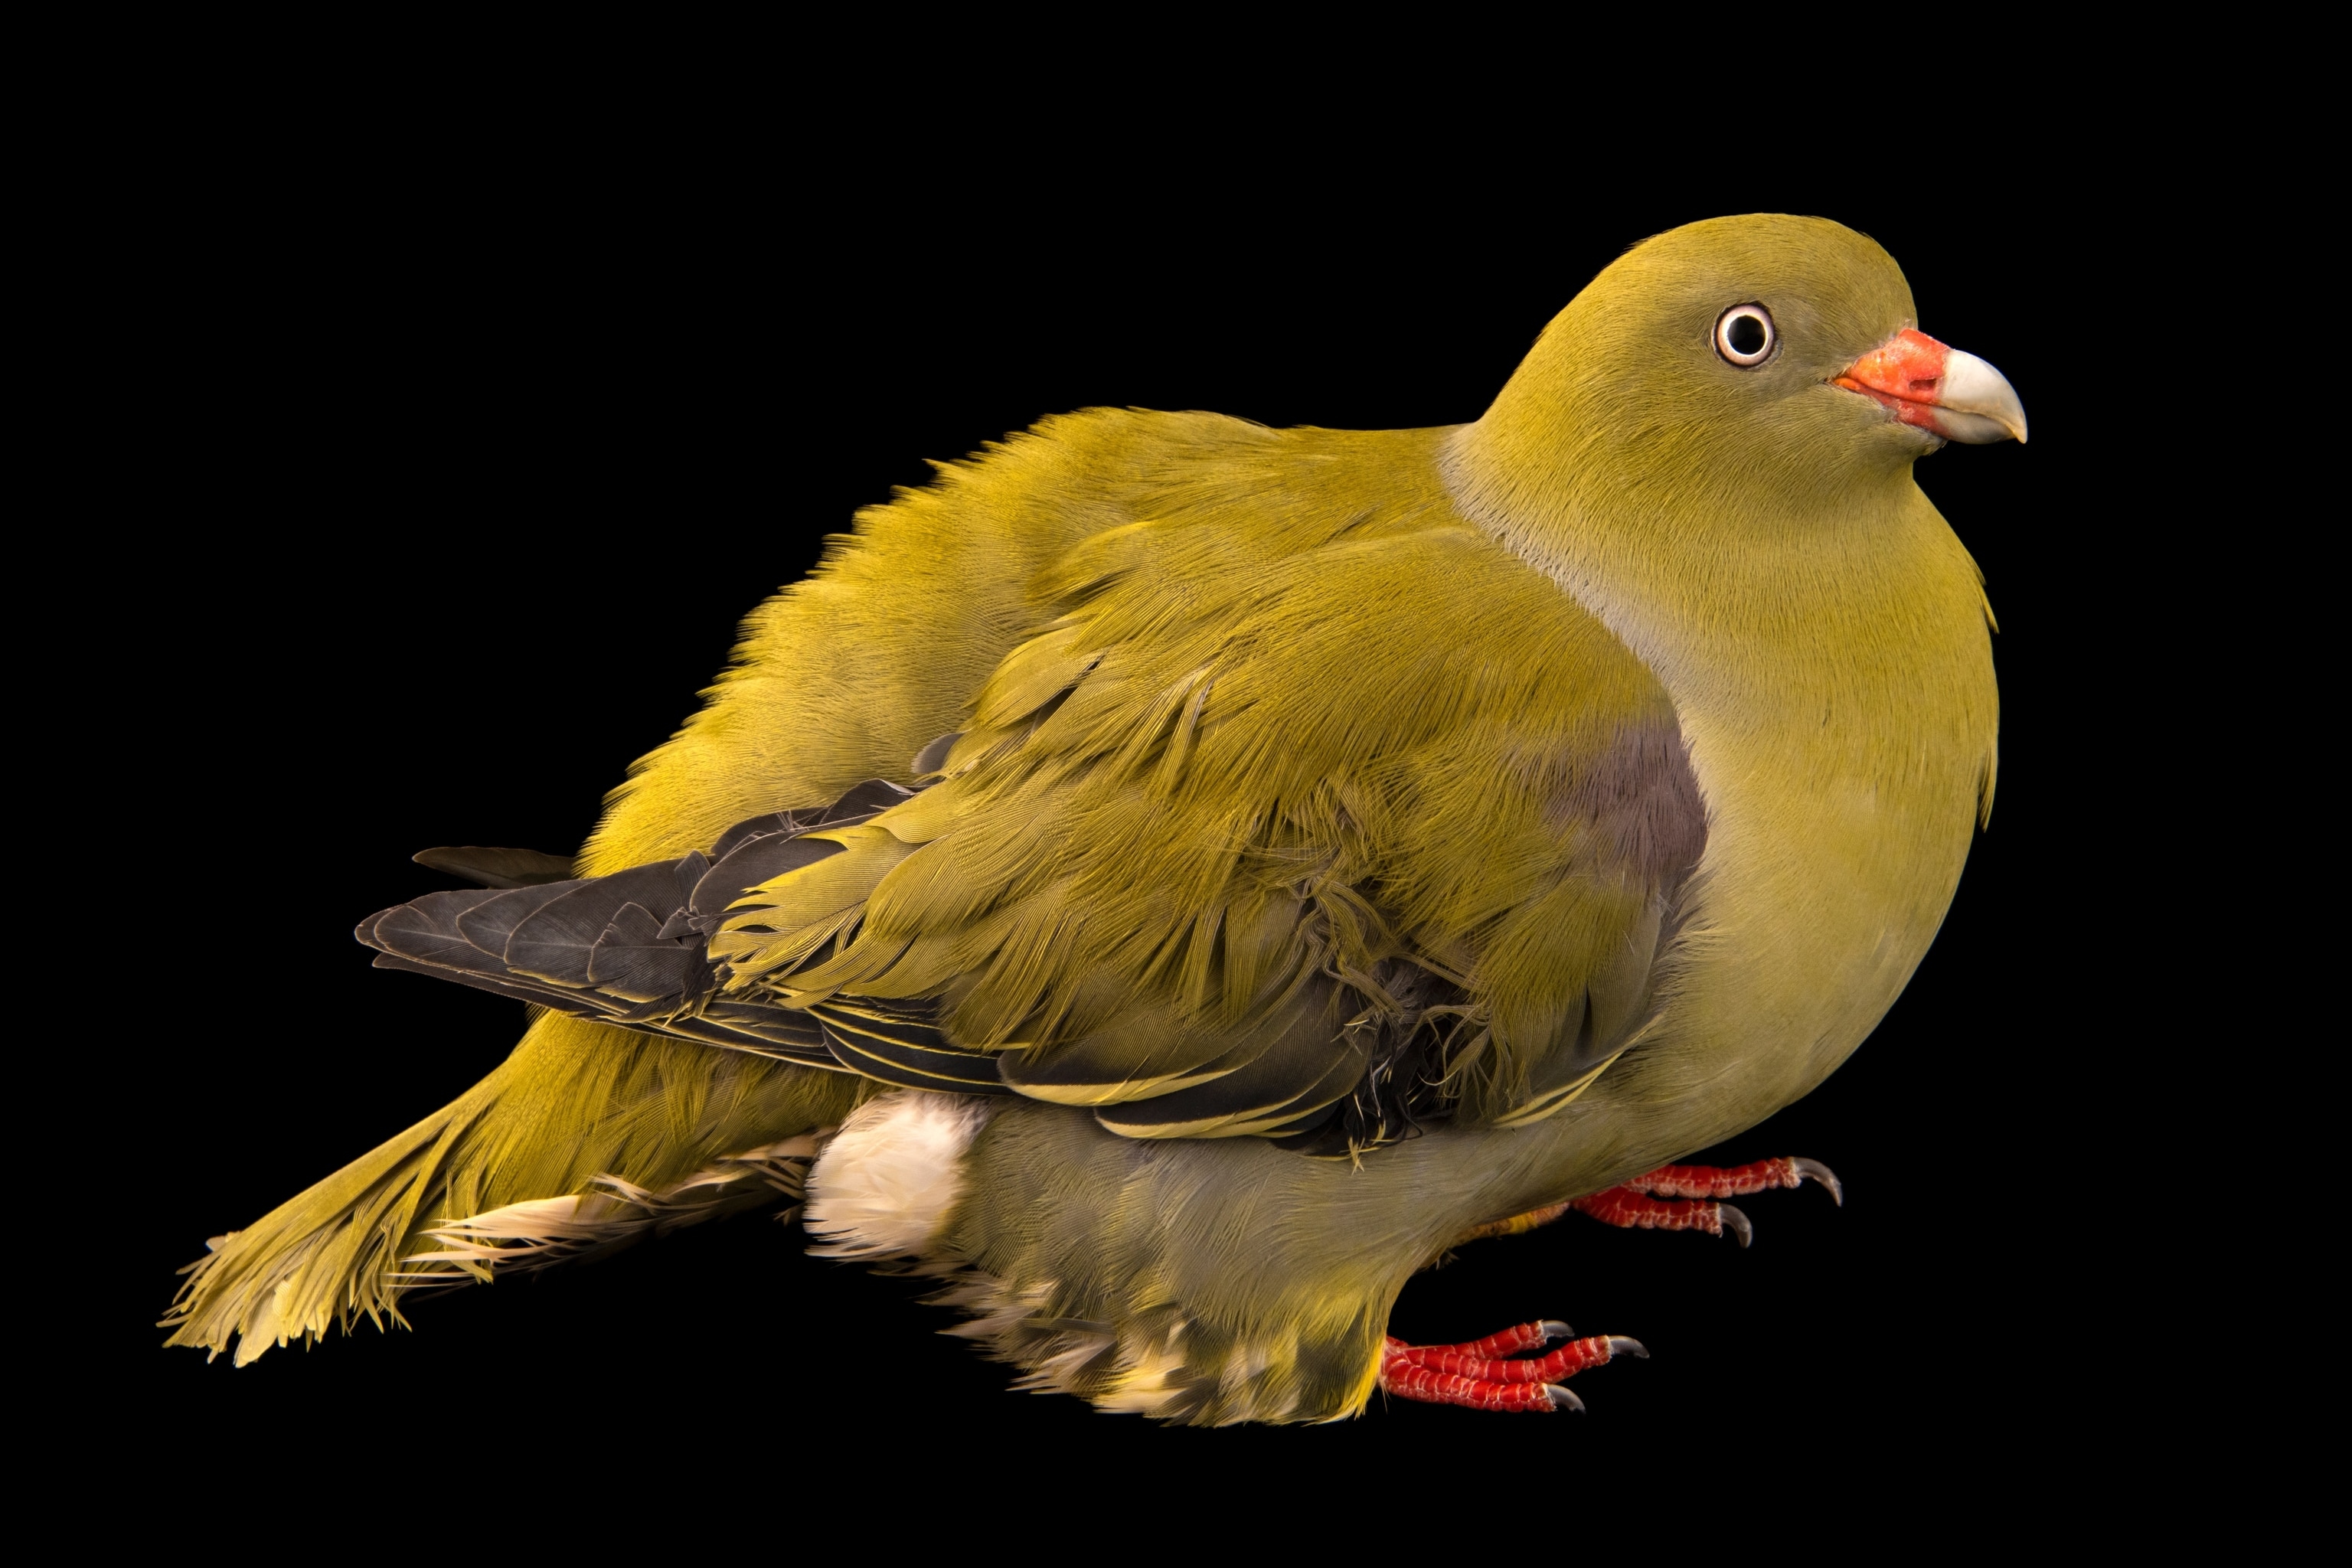 Studio photograph of a male African green pigeon